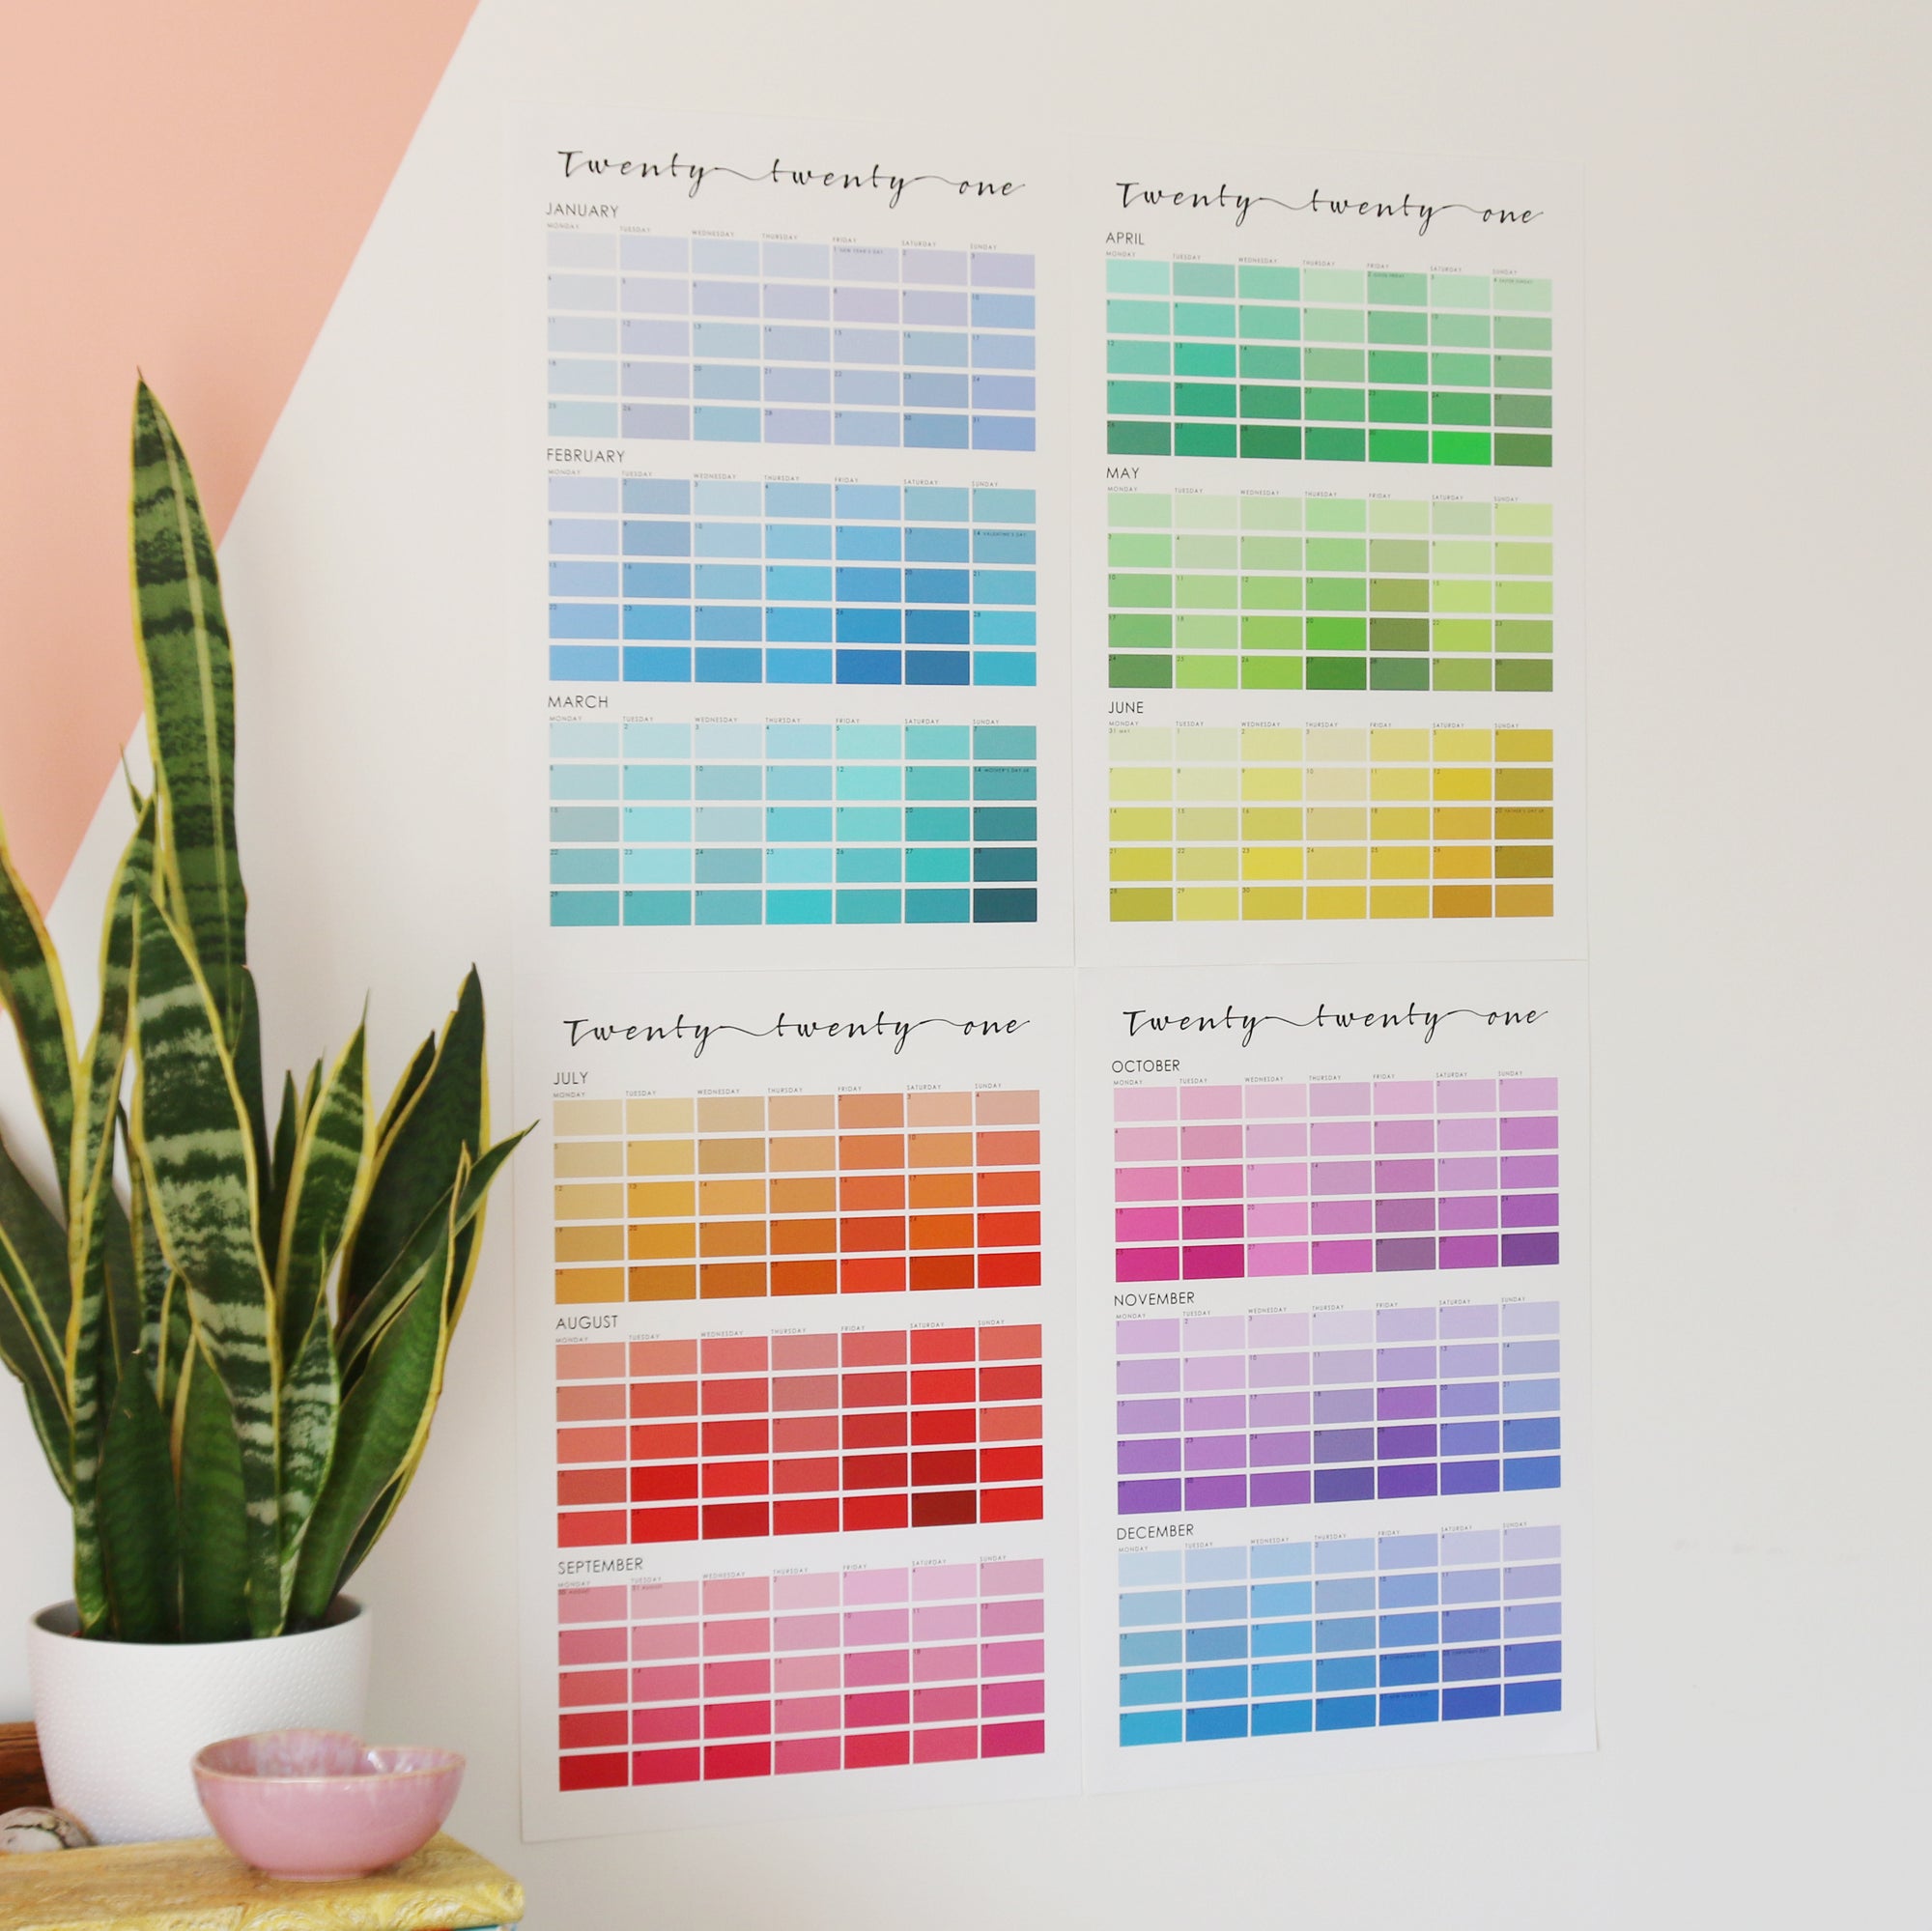 Getting beautifully organised with our gorgeous paint-chip wall planner